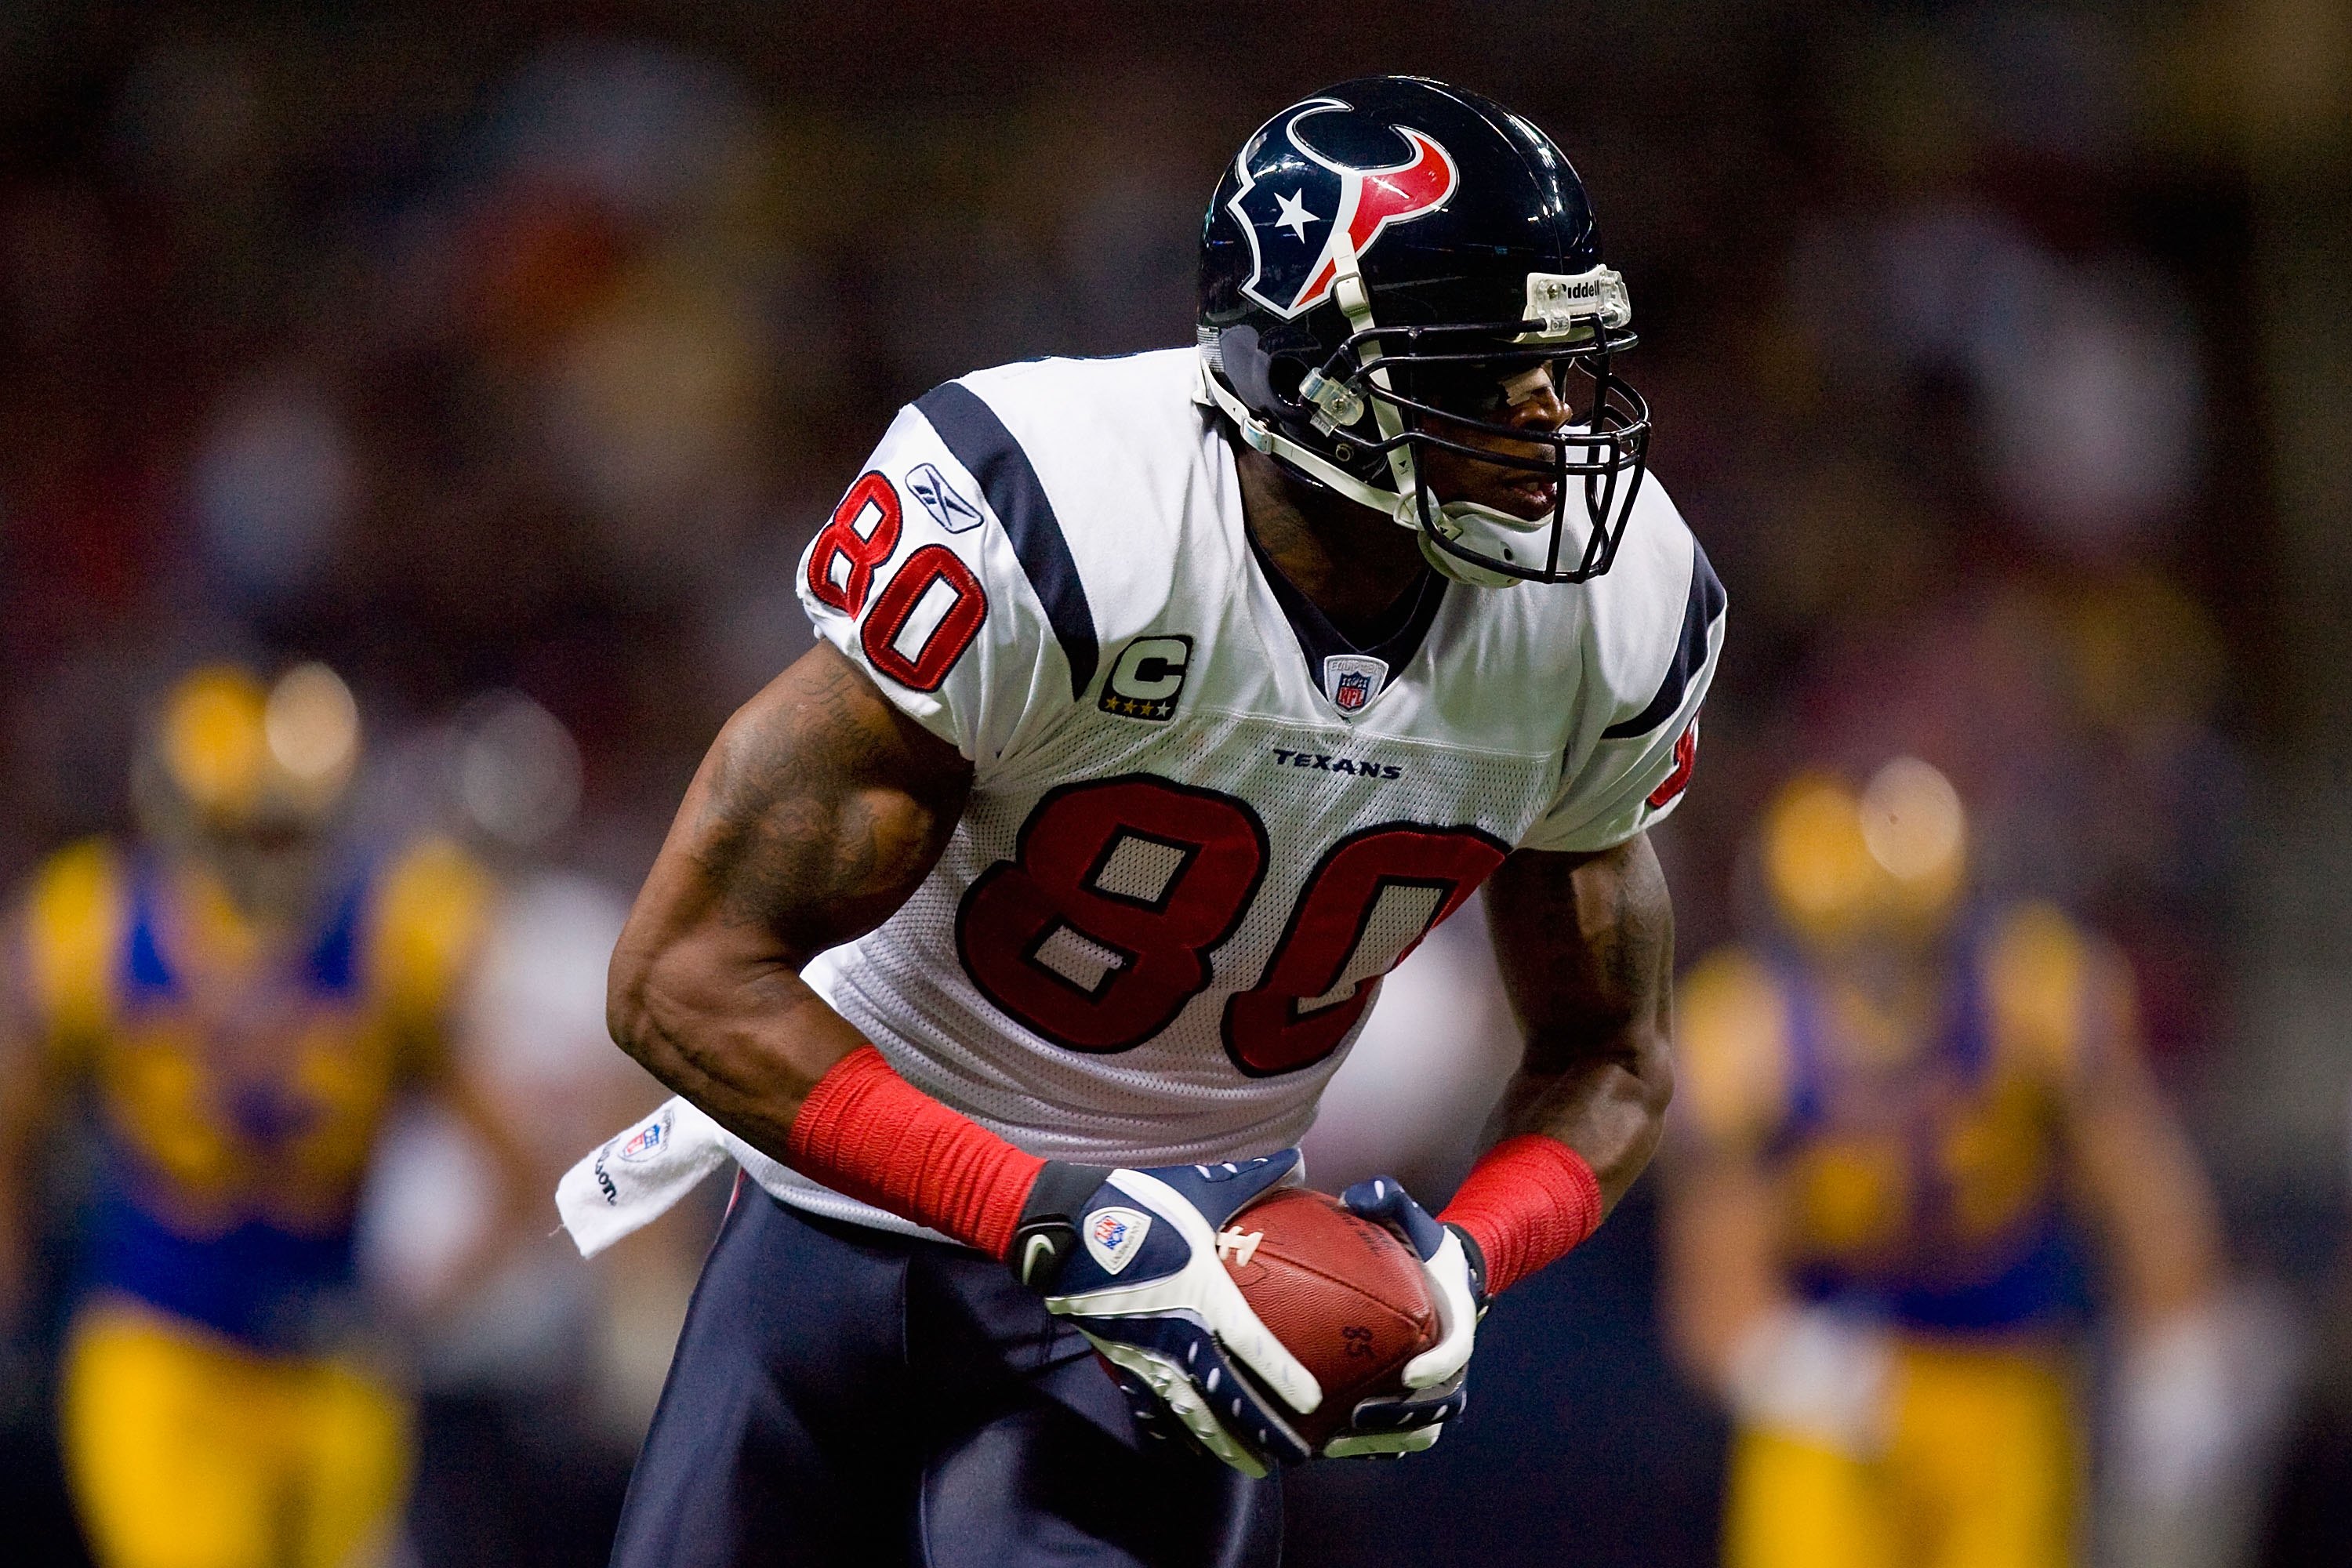 ST. LOUIS - DECEMBER 20:  Andre Johnson #80 of the Houston Texans carries the ball during the game against the St. Louis Rams at Edward Jones Dome on December 20, 2009 in St. Louis, Missouri.  (Photo by Dilip Vishwanat/Getty Images)